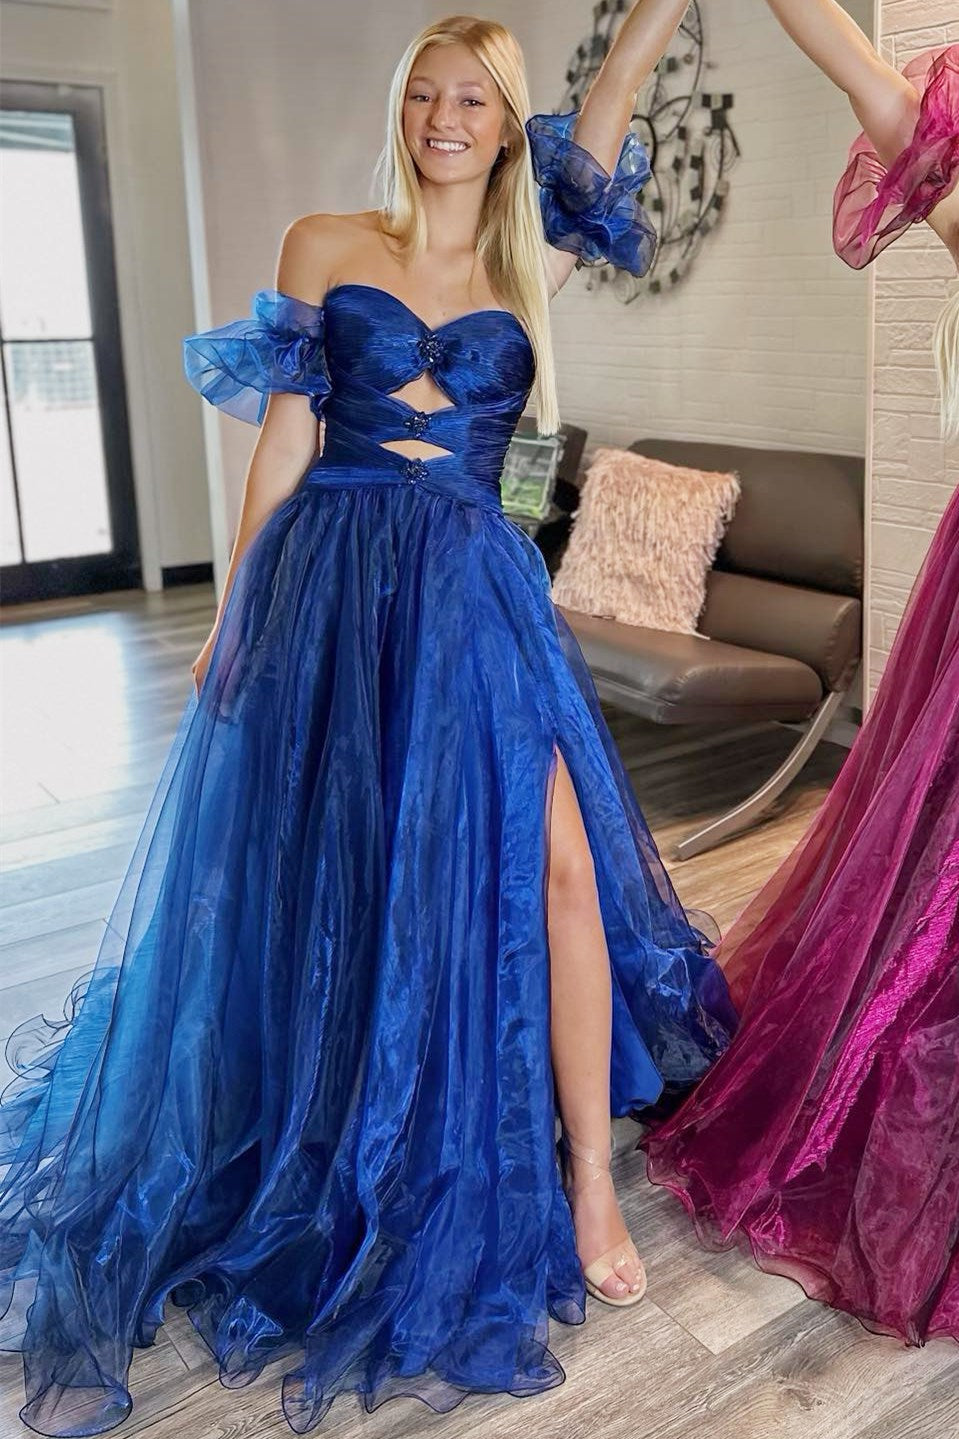 Blue Strapless Cutout Long Prom Dress with Detachable Sleeves